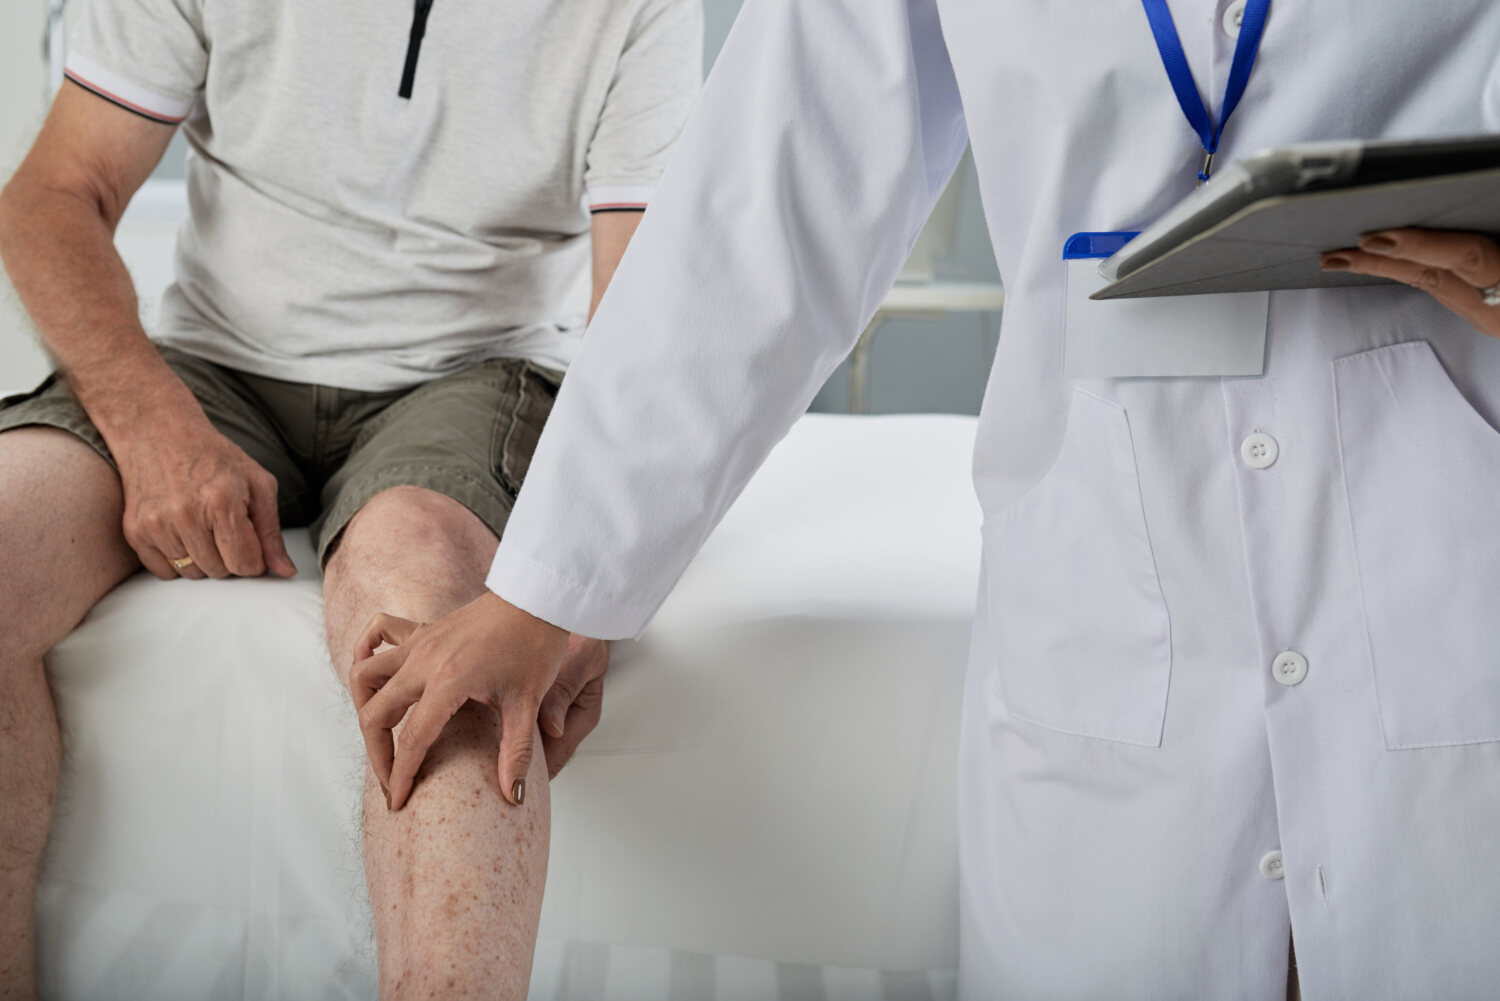 Release Your Limitations: The Ten Most Important Reasons to See Dr. Sumitz as Your Knee Specialist